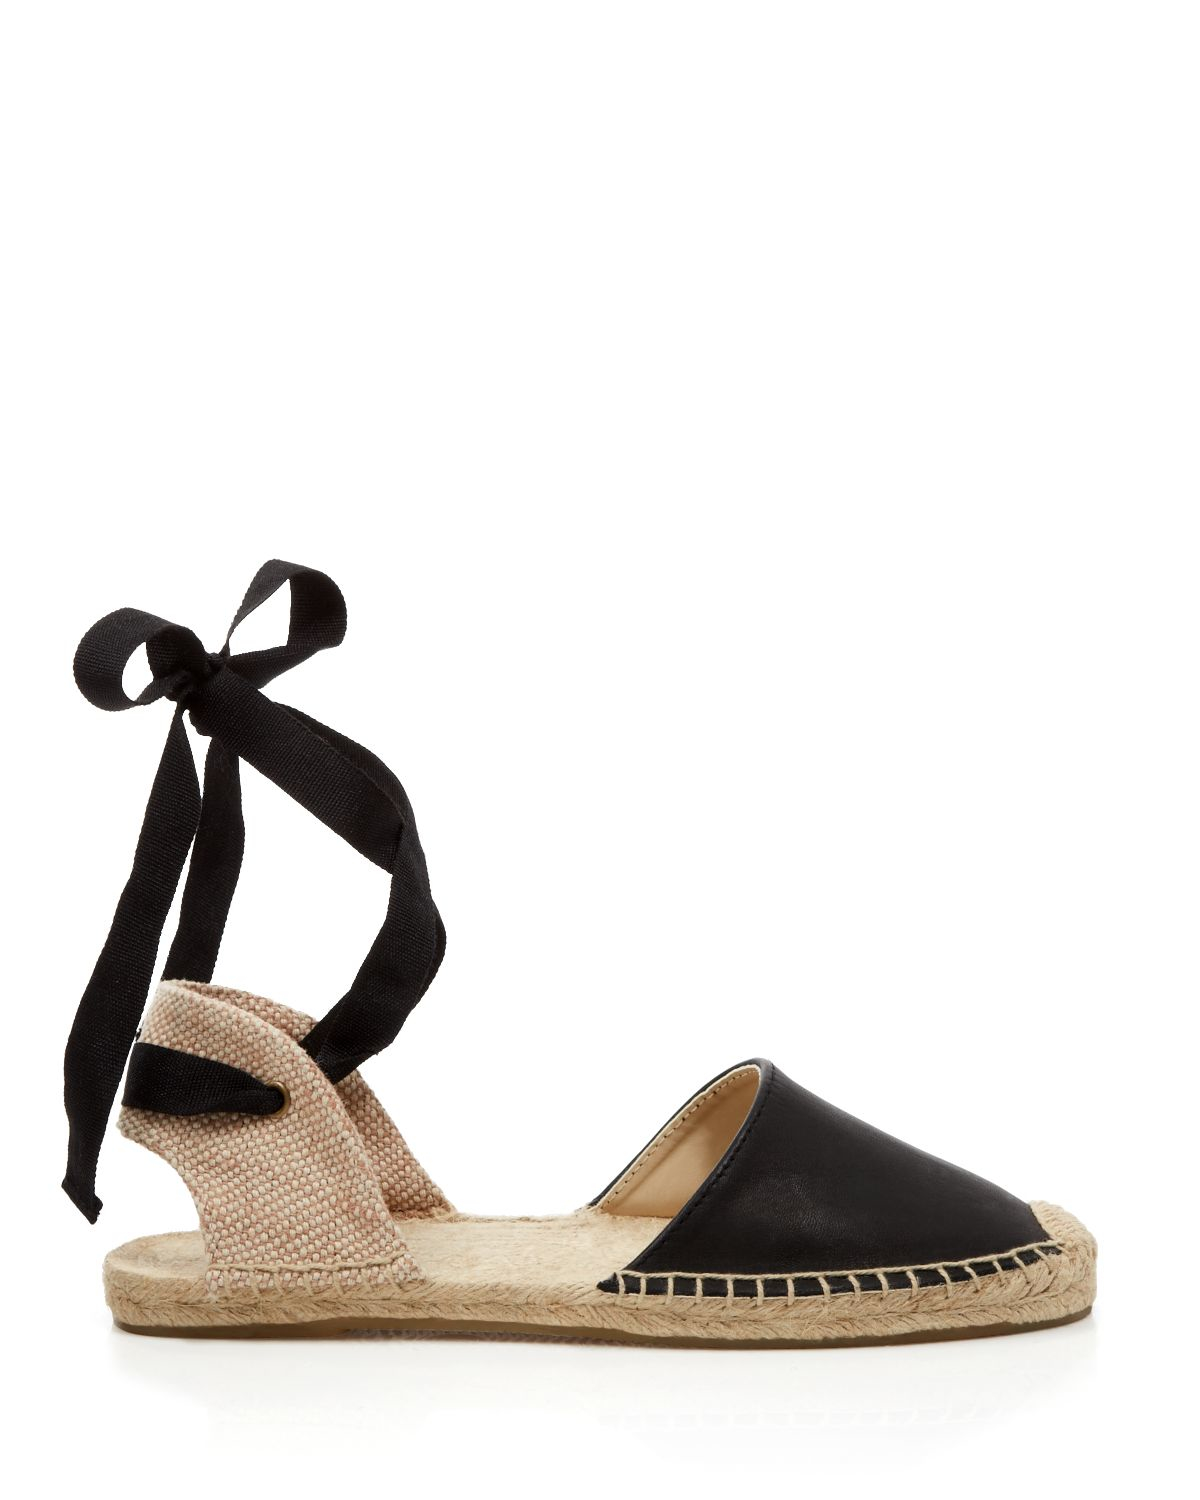 Soludos Espadrille Flat Sandals - Classic Ankle Wrap in Black | Lyst